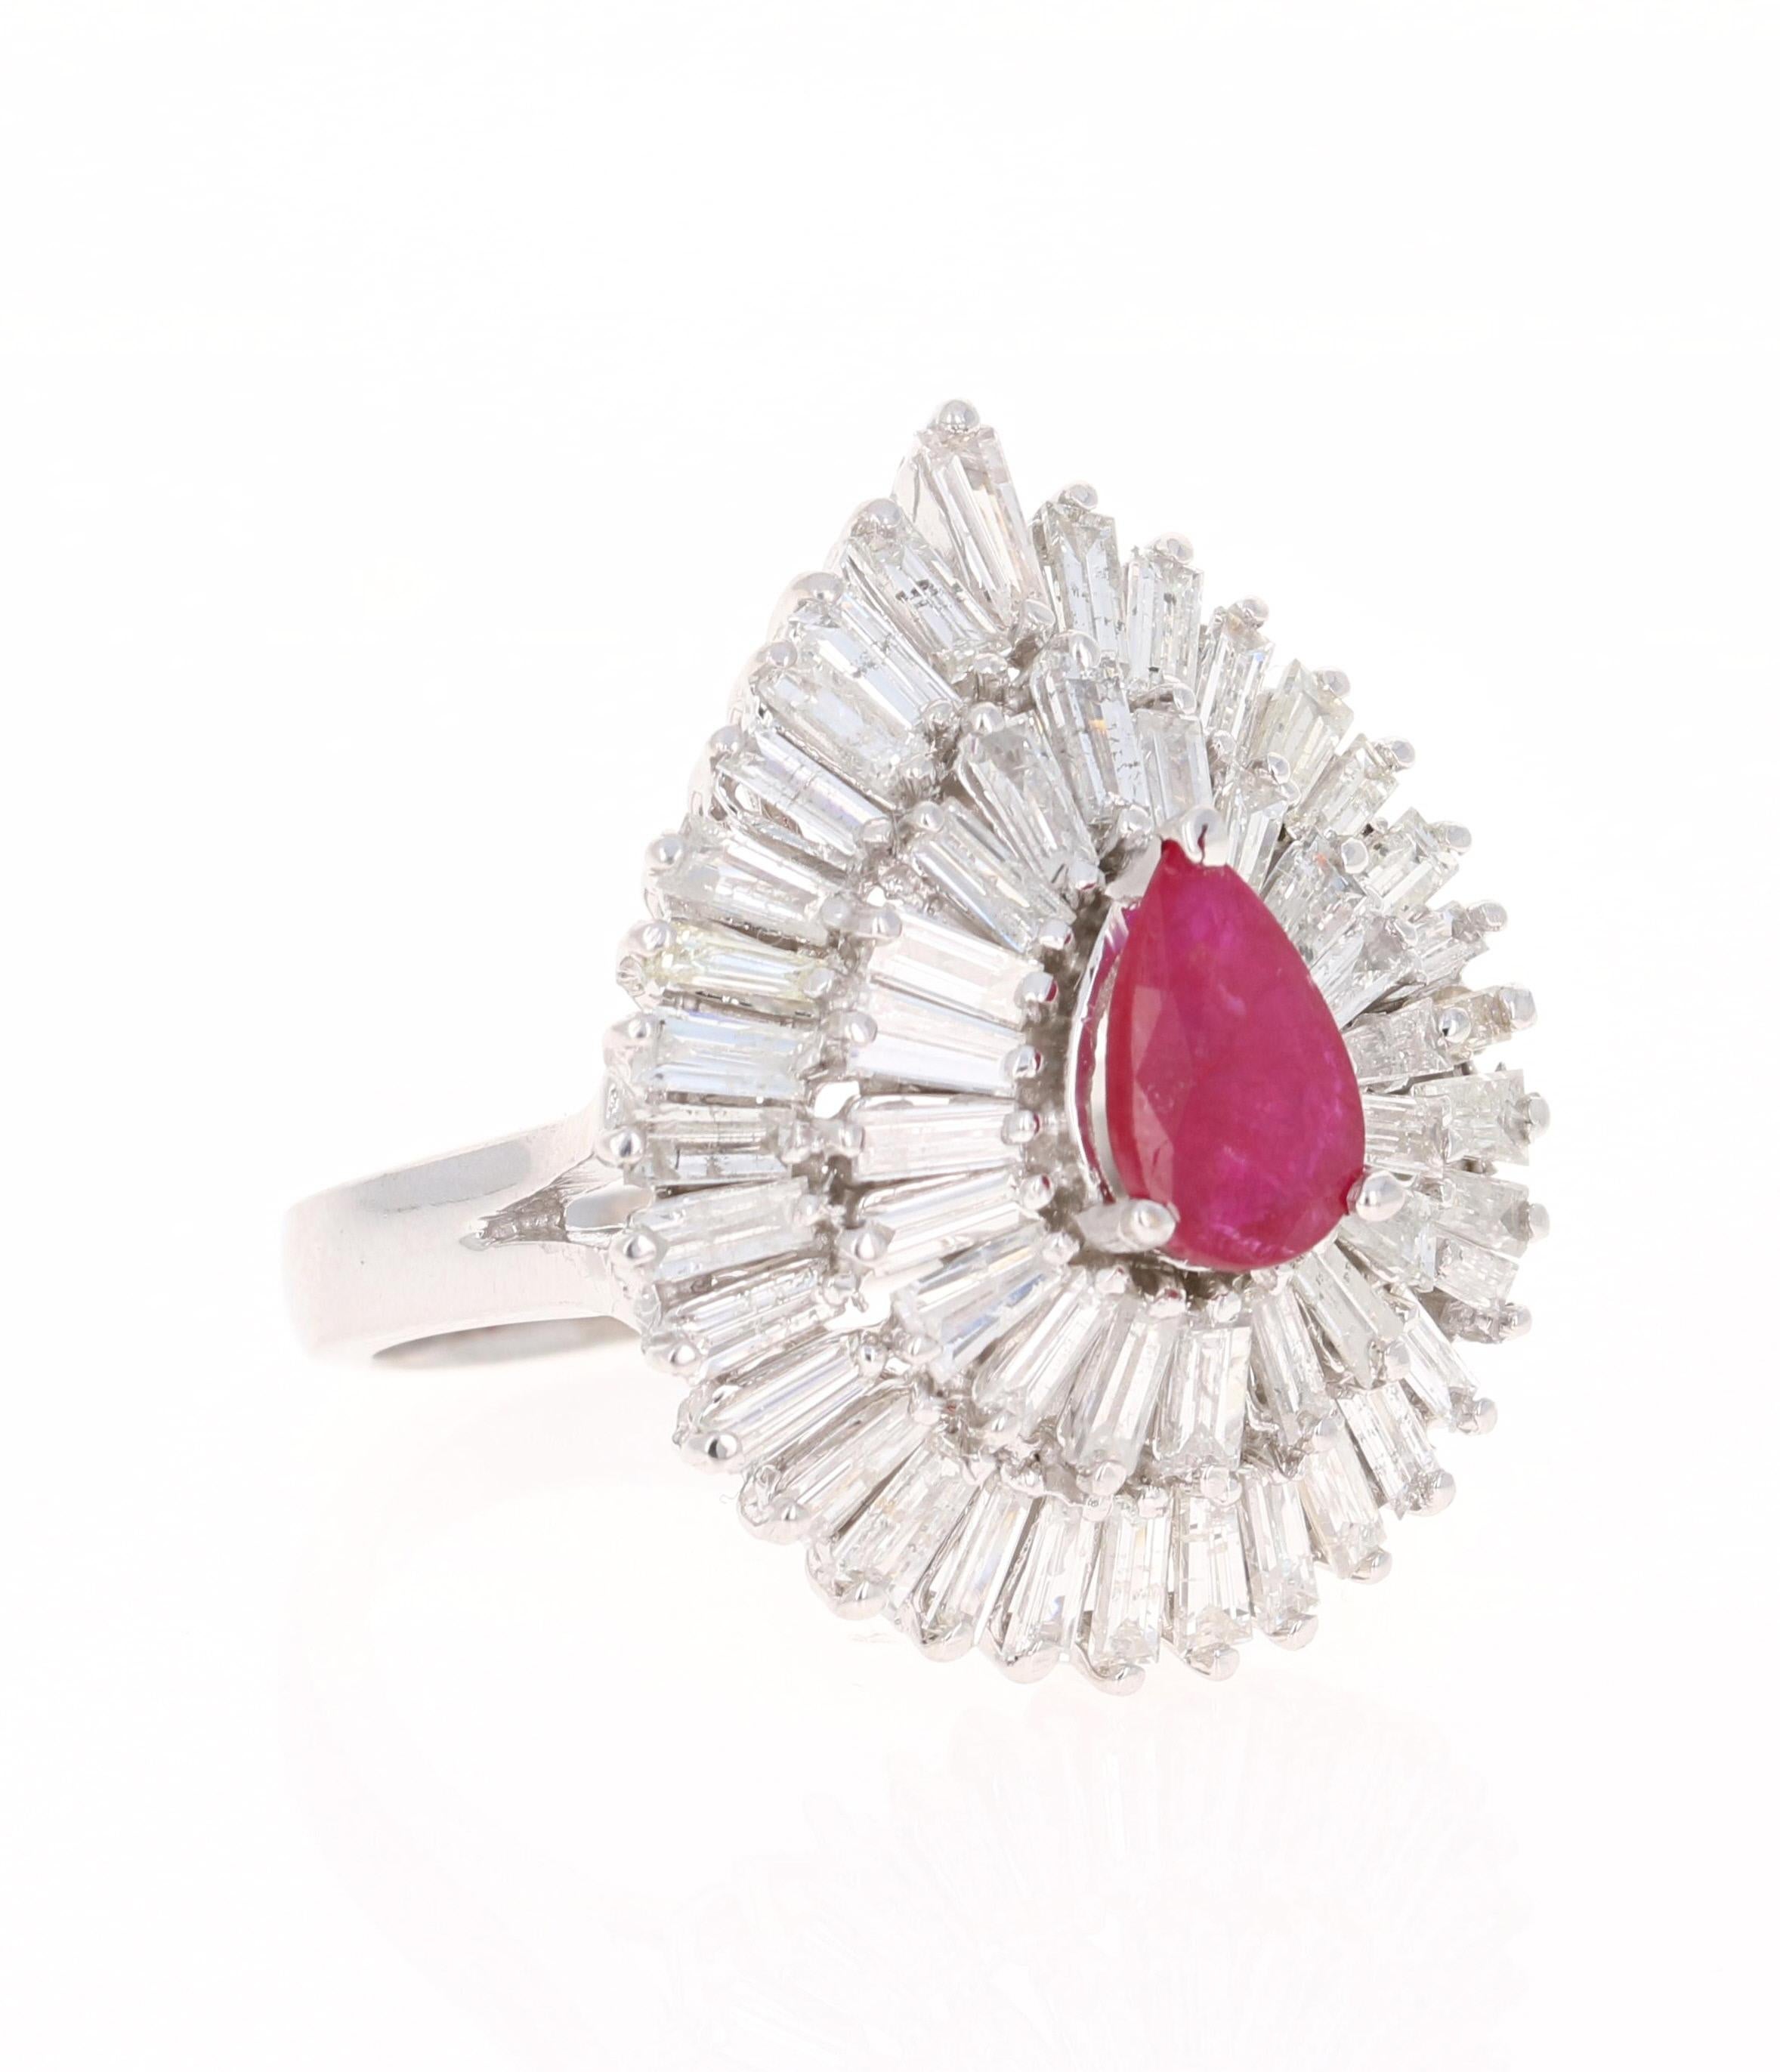 This ring is truly a remarkable piece that will surely add value to ones collection of jewels! A ballerina ring at its best! 

There is a Pear Cut Ruby set in the center of the ring that weighs 1.10 carats. There are 53 Baguette Cut Diamonds that